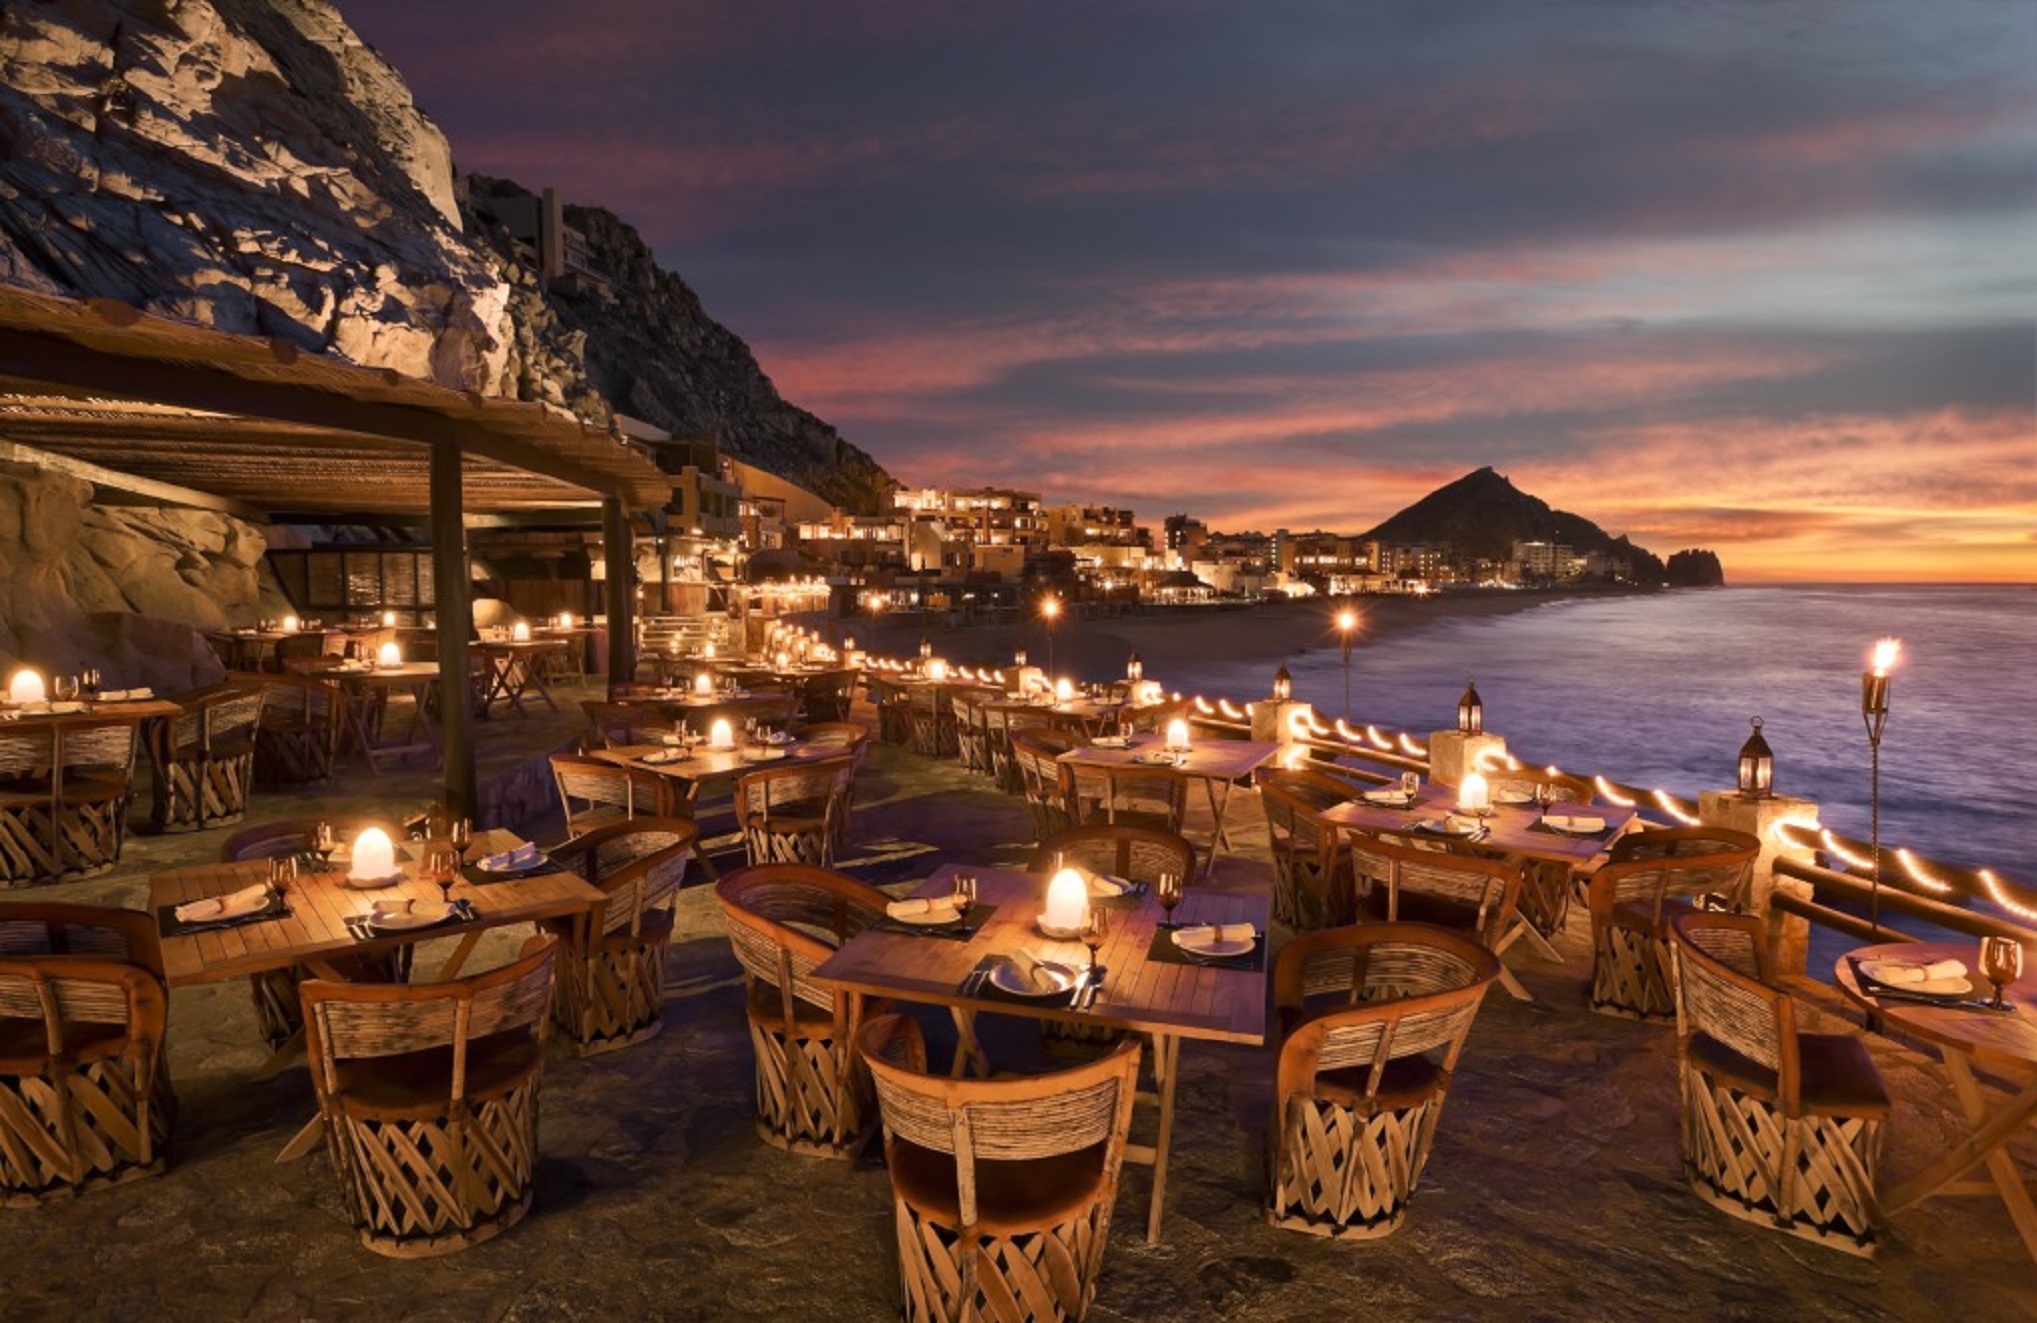 Oceanside Dining at El Farallon Restaurant in Cabo San Lucas Mexico One of the top restaurants in the world with best views